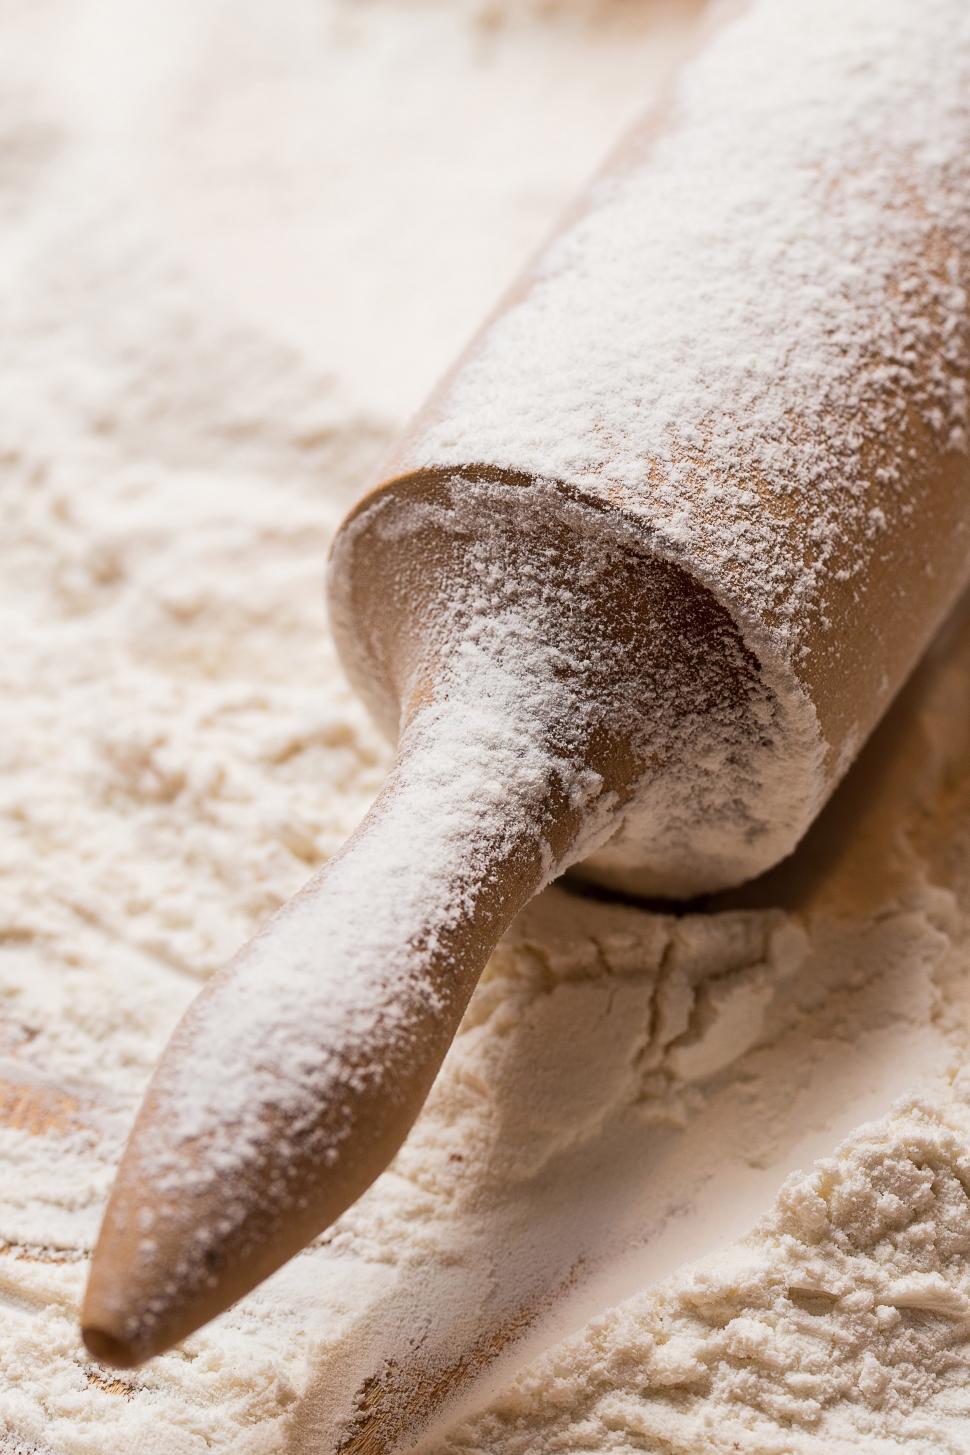 Free Image of Cooking, close-up. Wooden rolling pin in the flour 